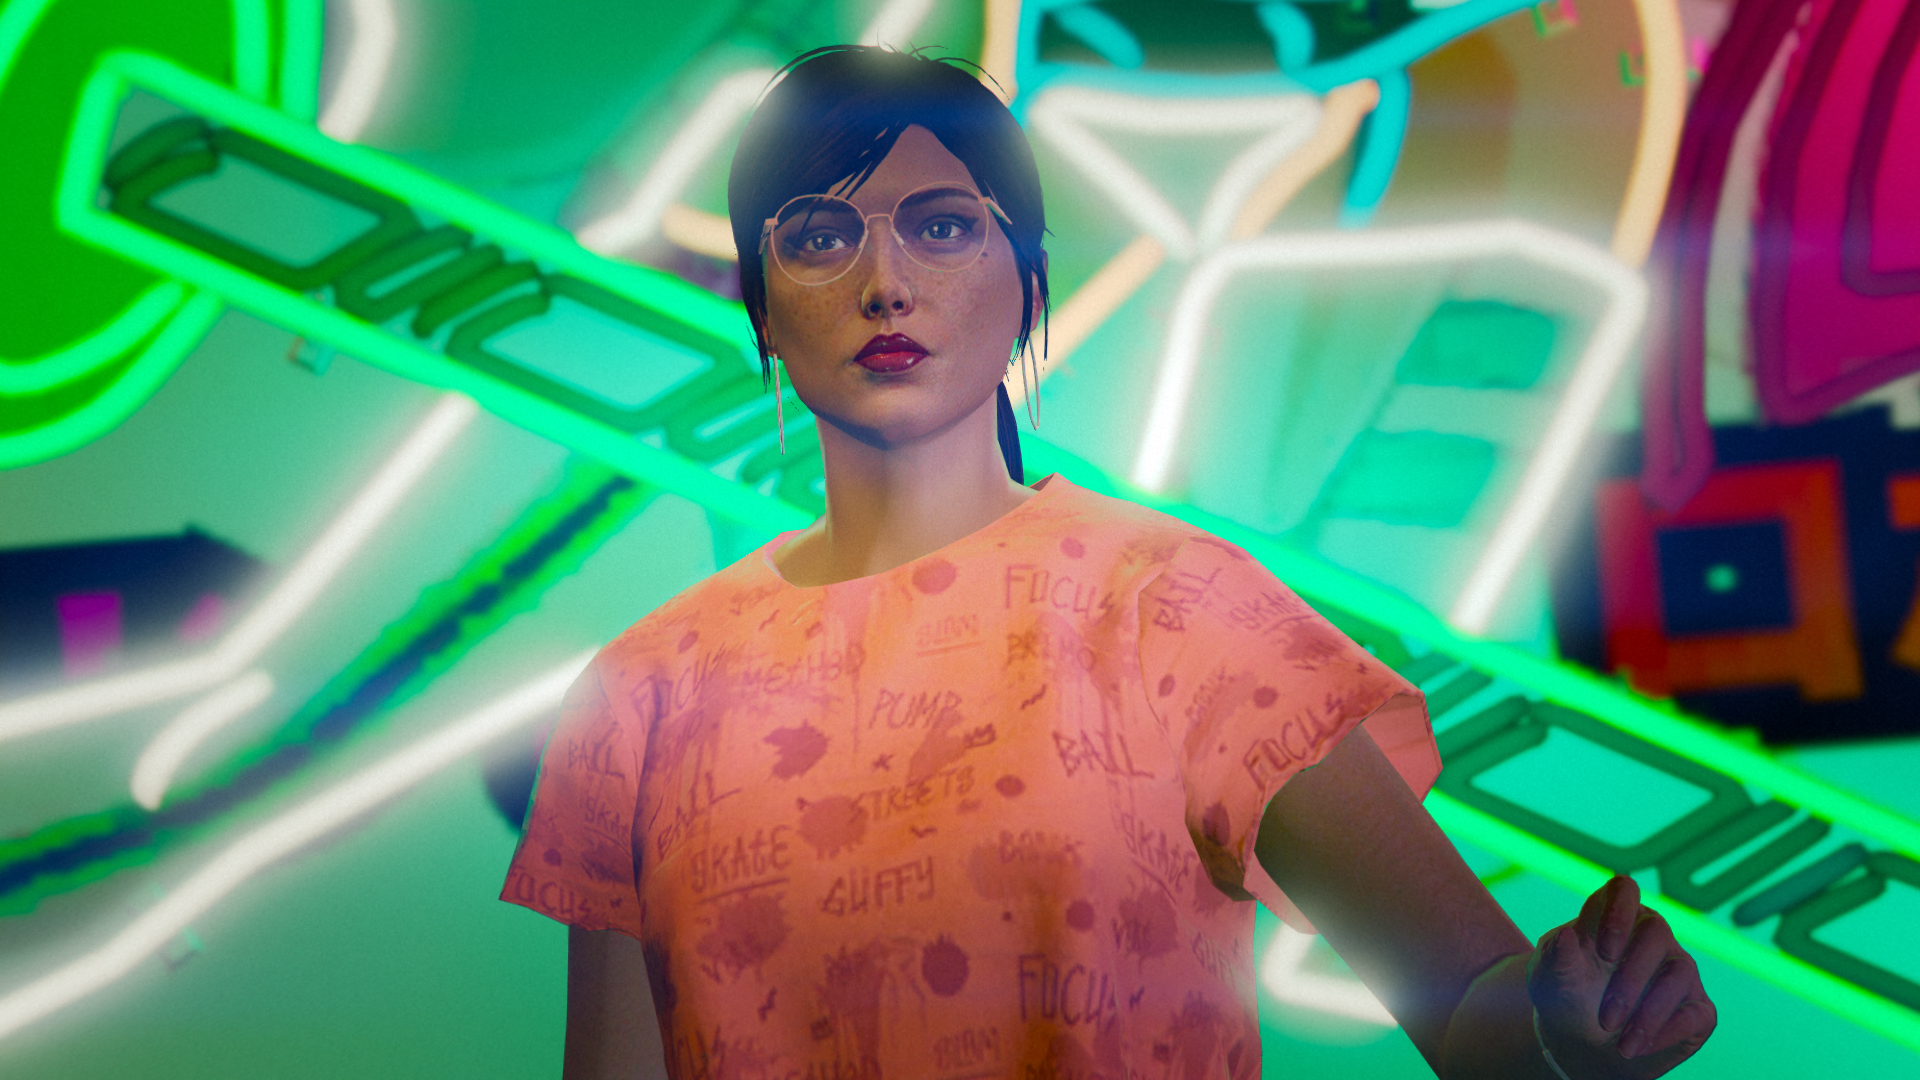 General 1920x1080 Grand Theft Auto V screen shot video games video game characters neon video game girls CGI glasses lights